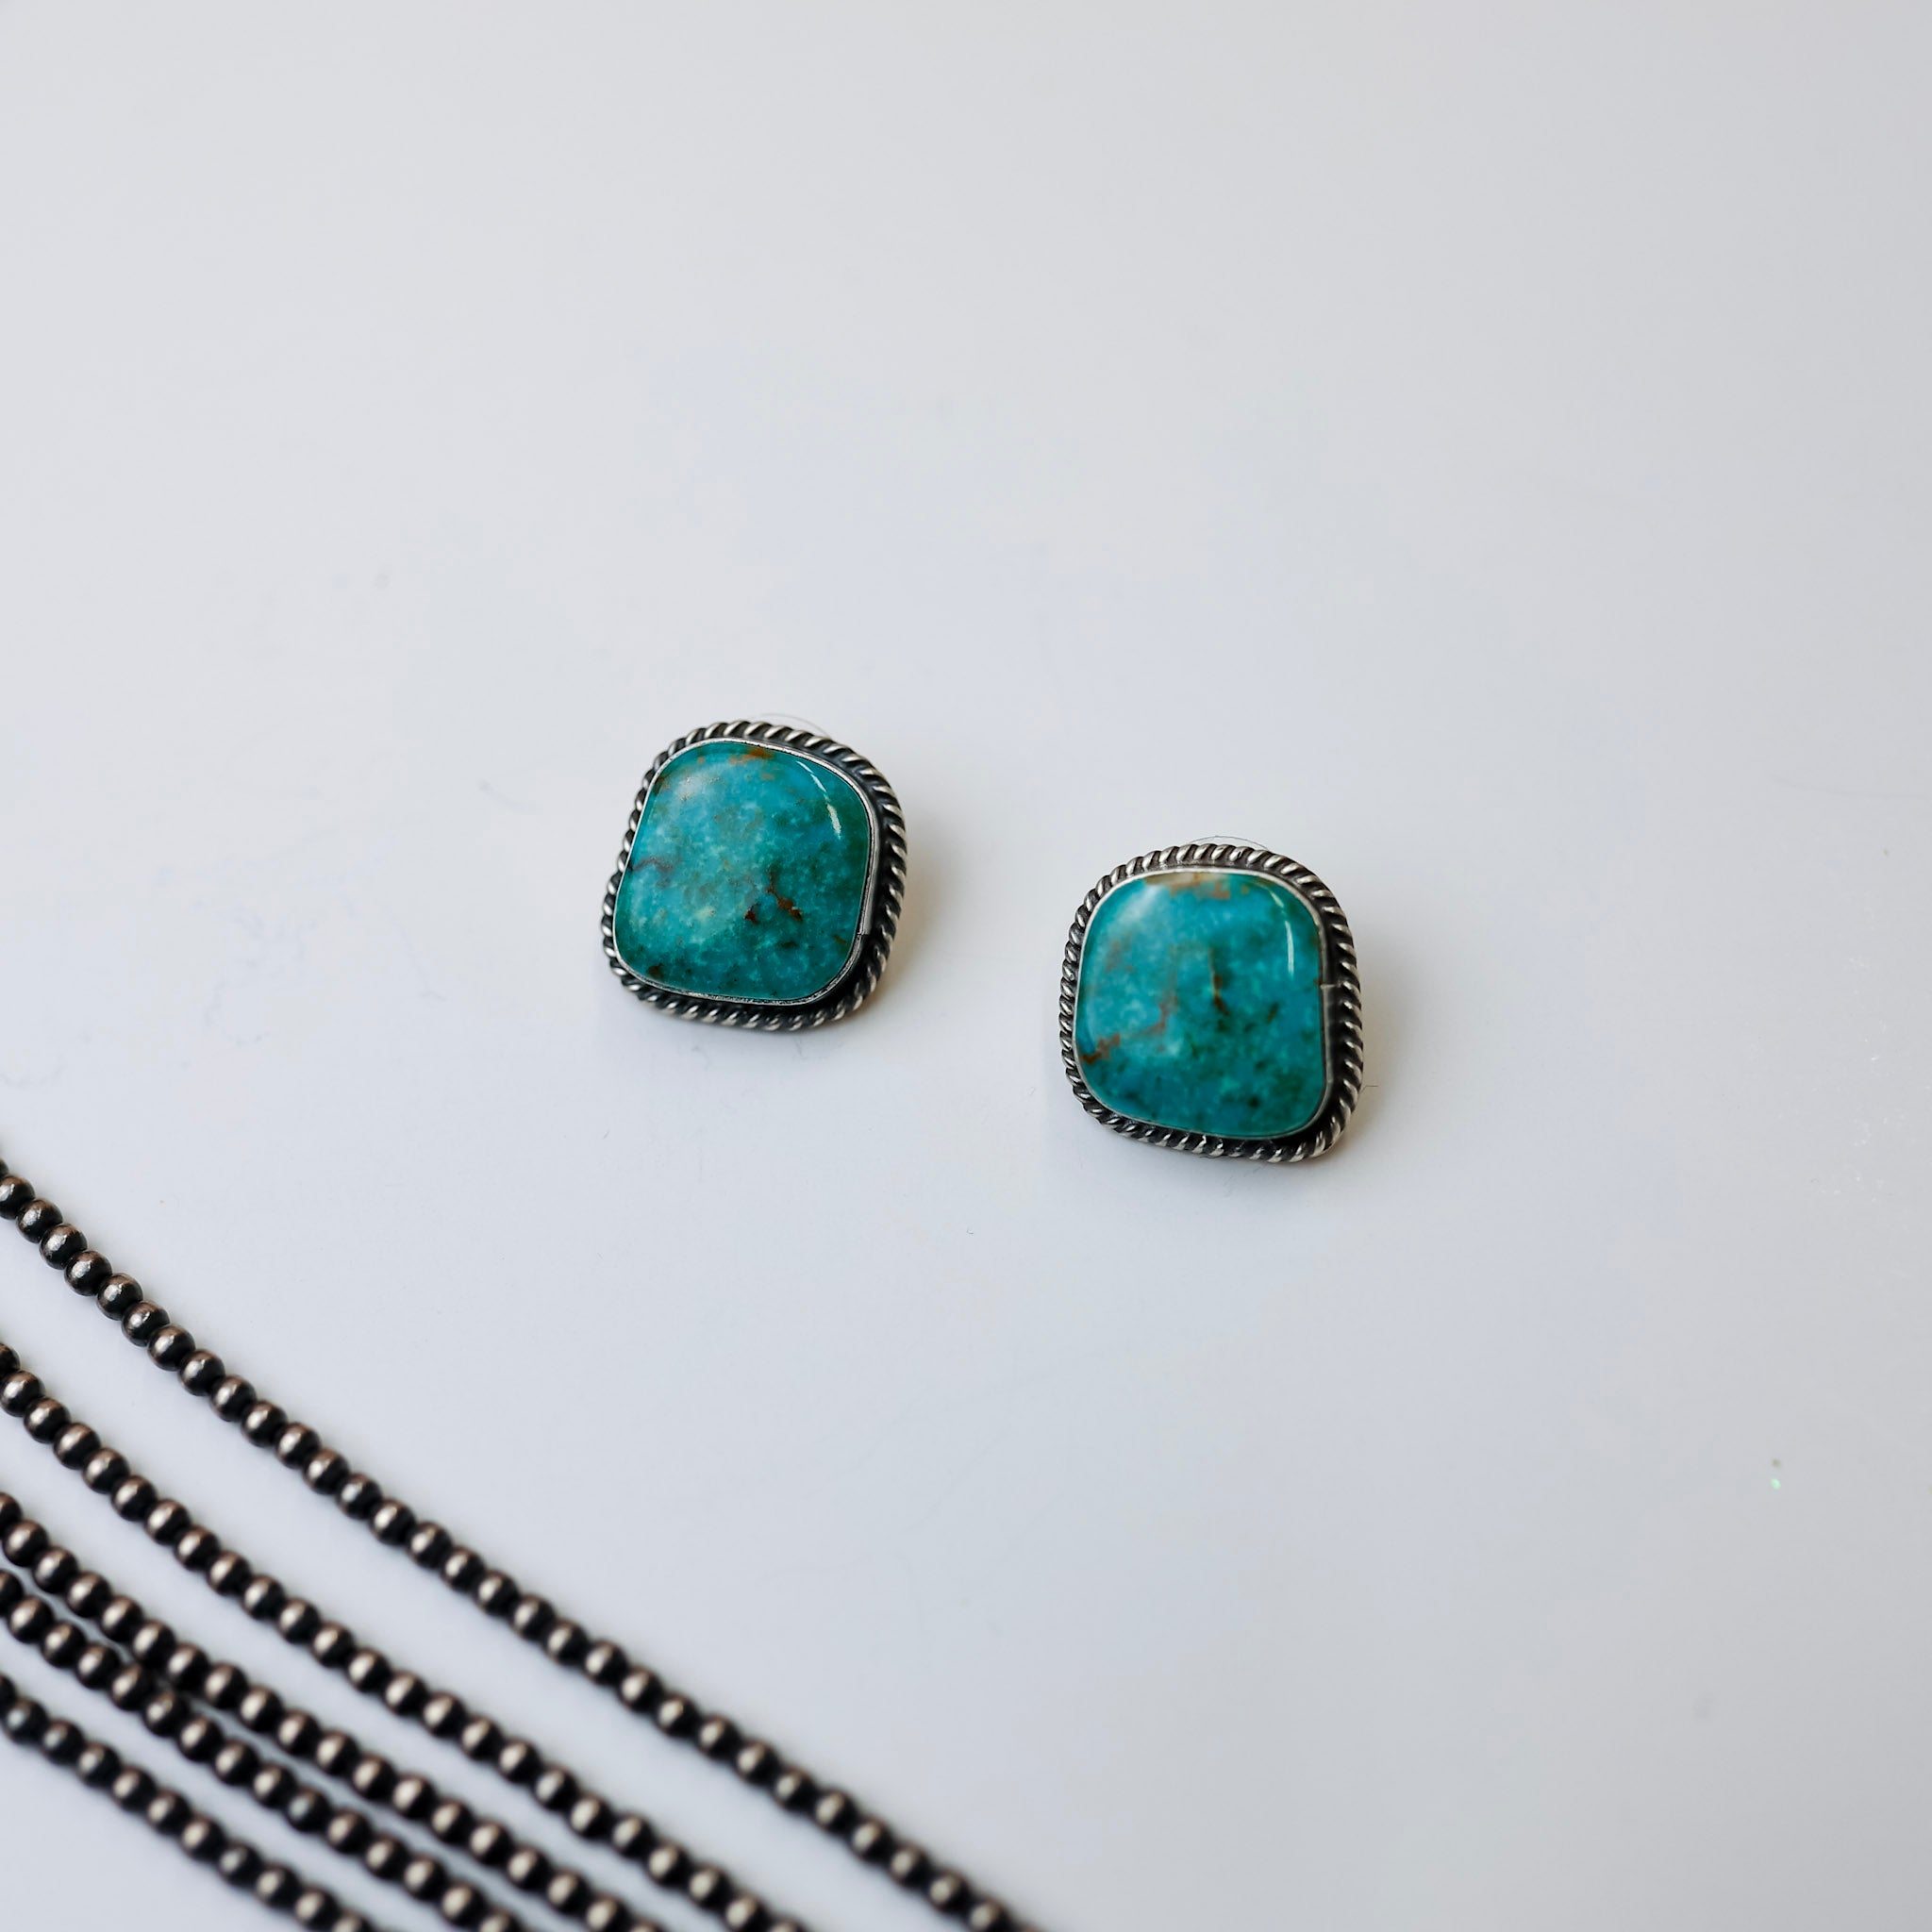 Elouise Kee Genuine Navajo Handmade Sterling Silver Indian Handcrafted Kingman turquoise stud earrings. Background is white with navajo pearl necklaces in the bottom left corner. 